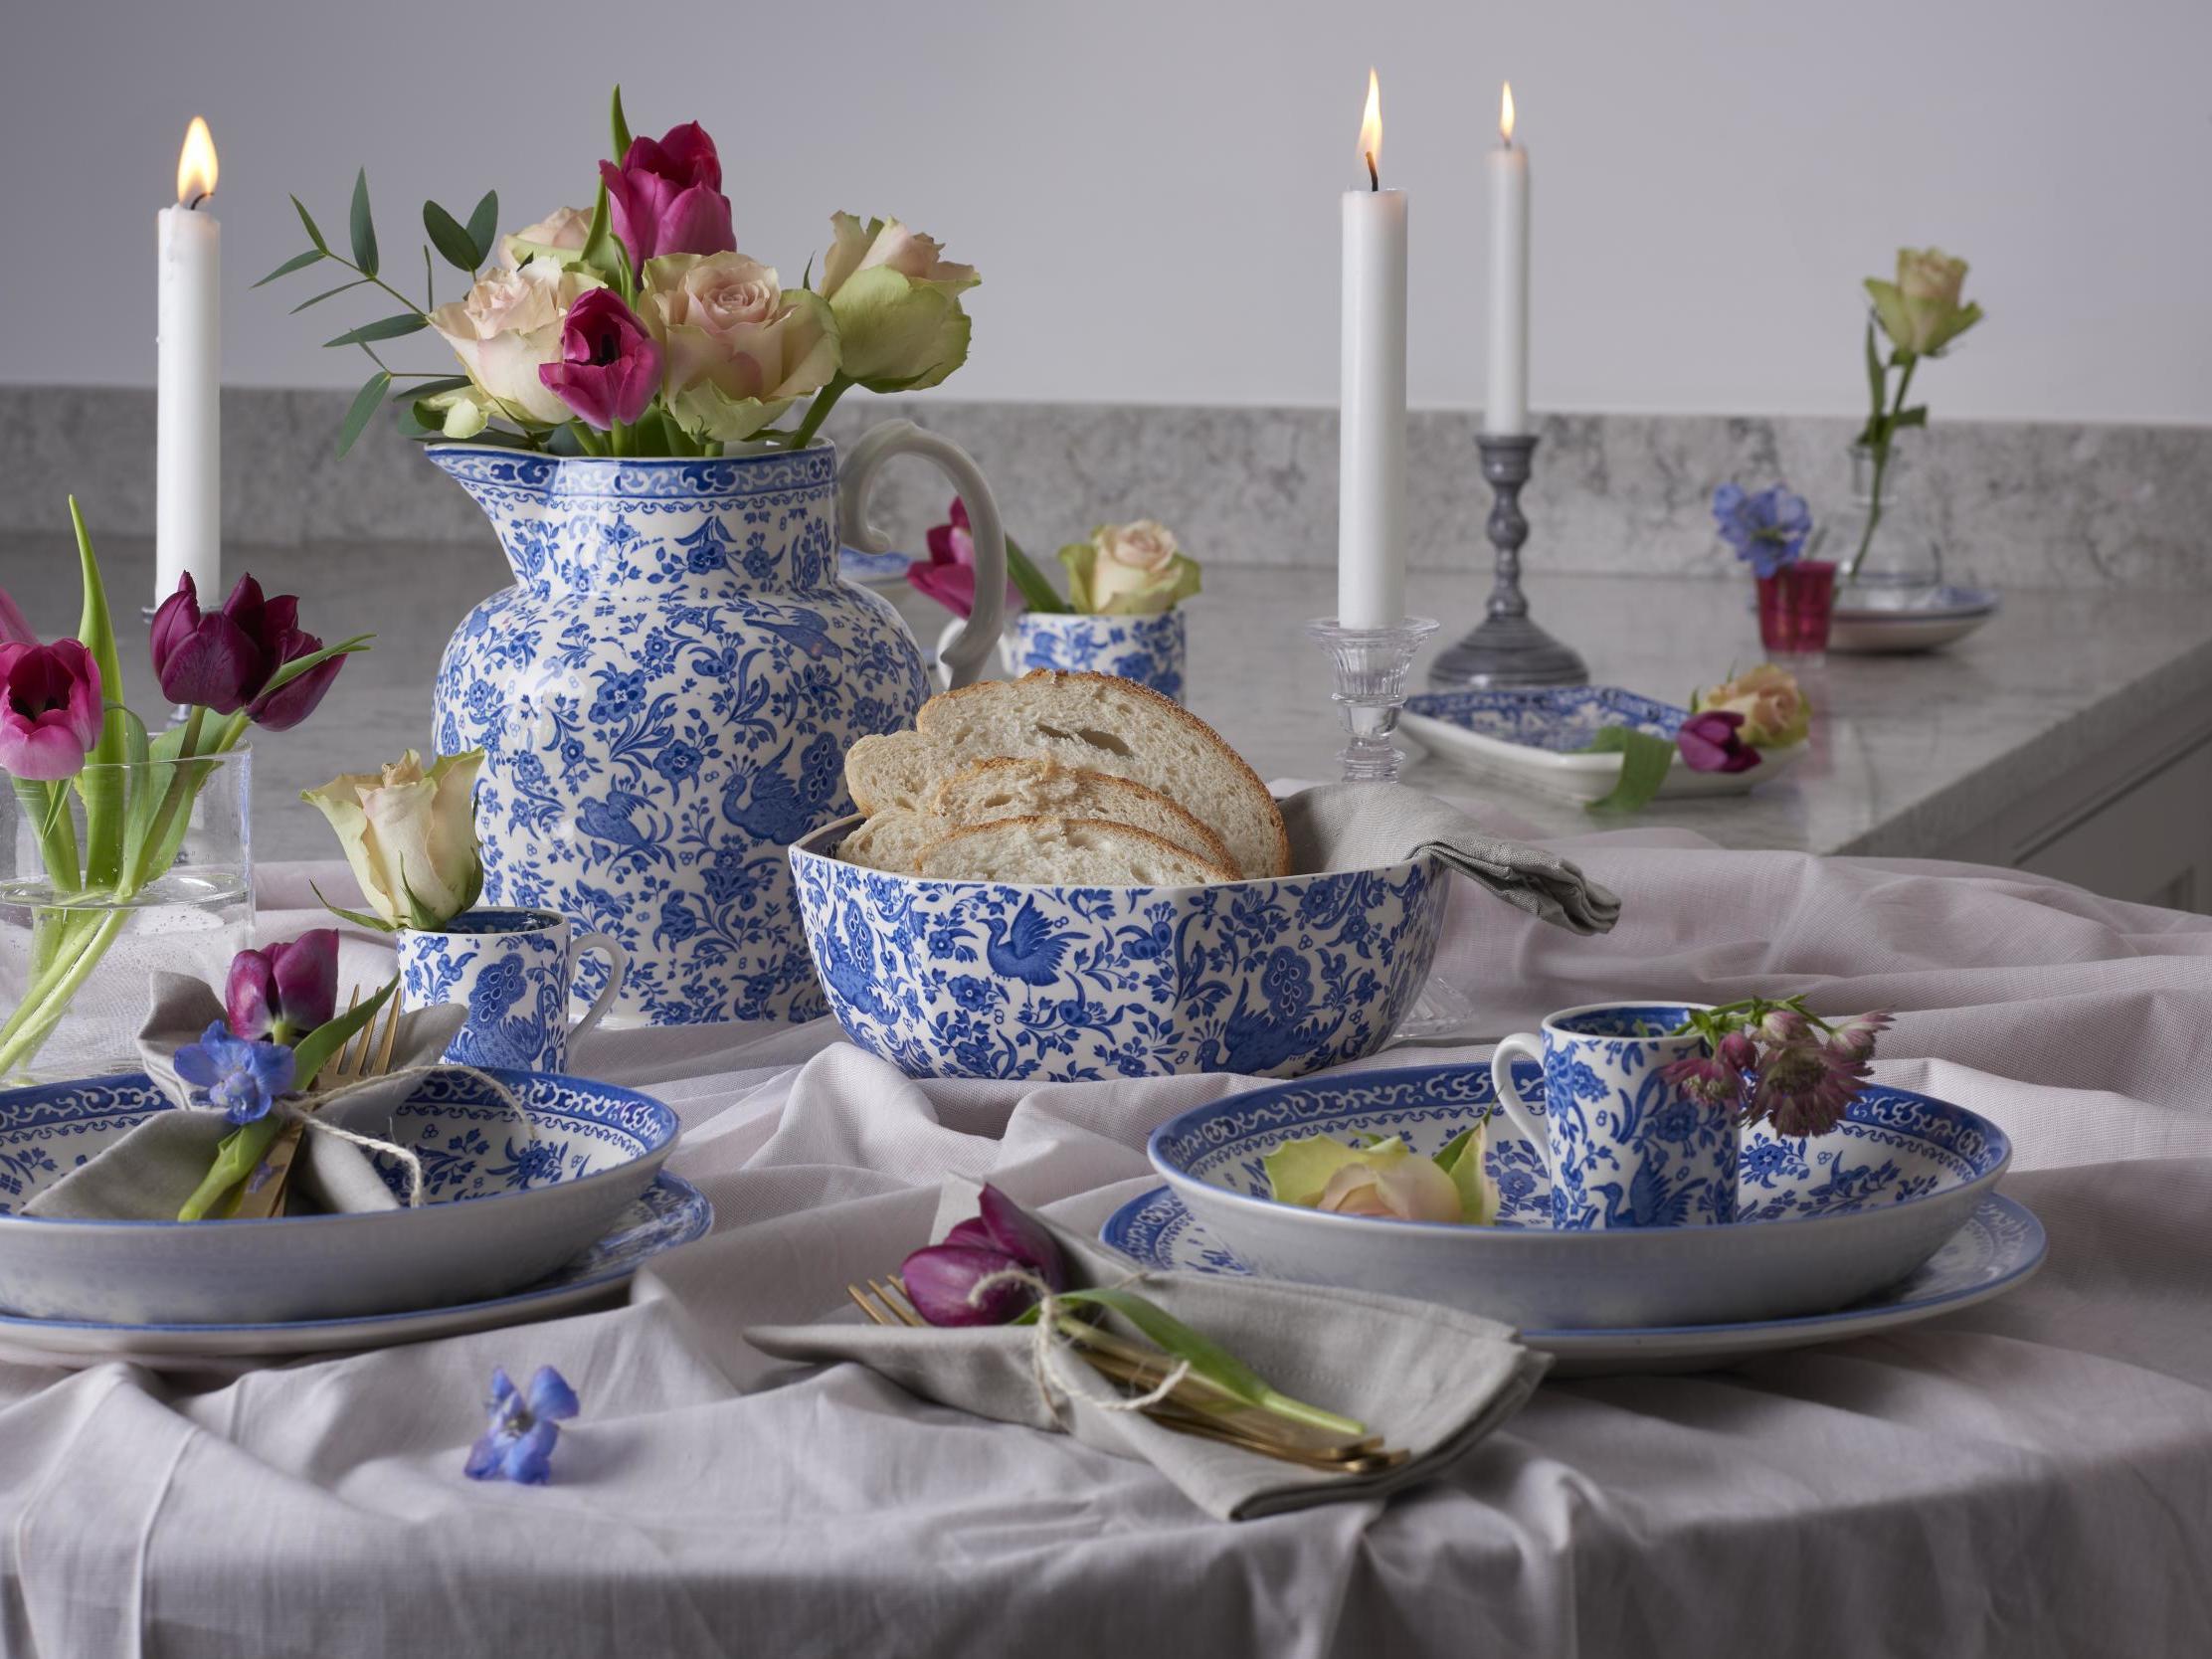 Make your Christmas table the stuff of tablescaping dreams this year